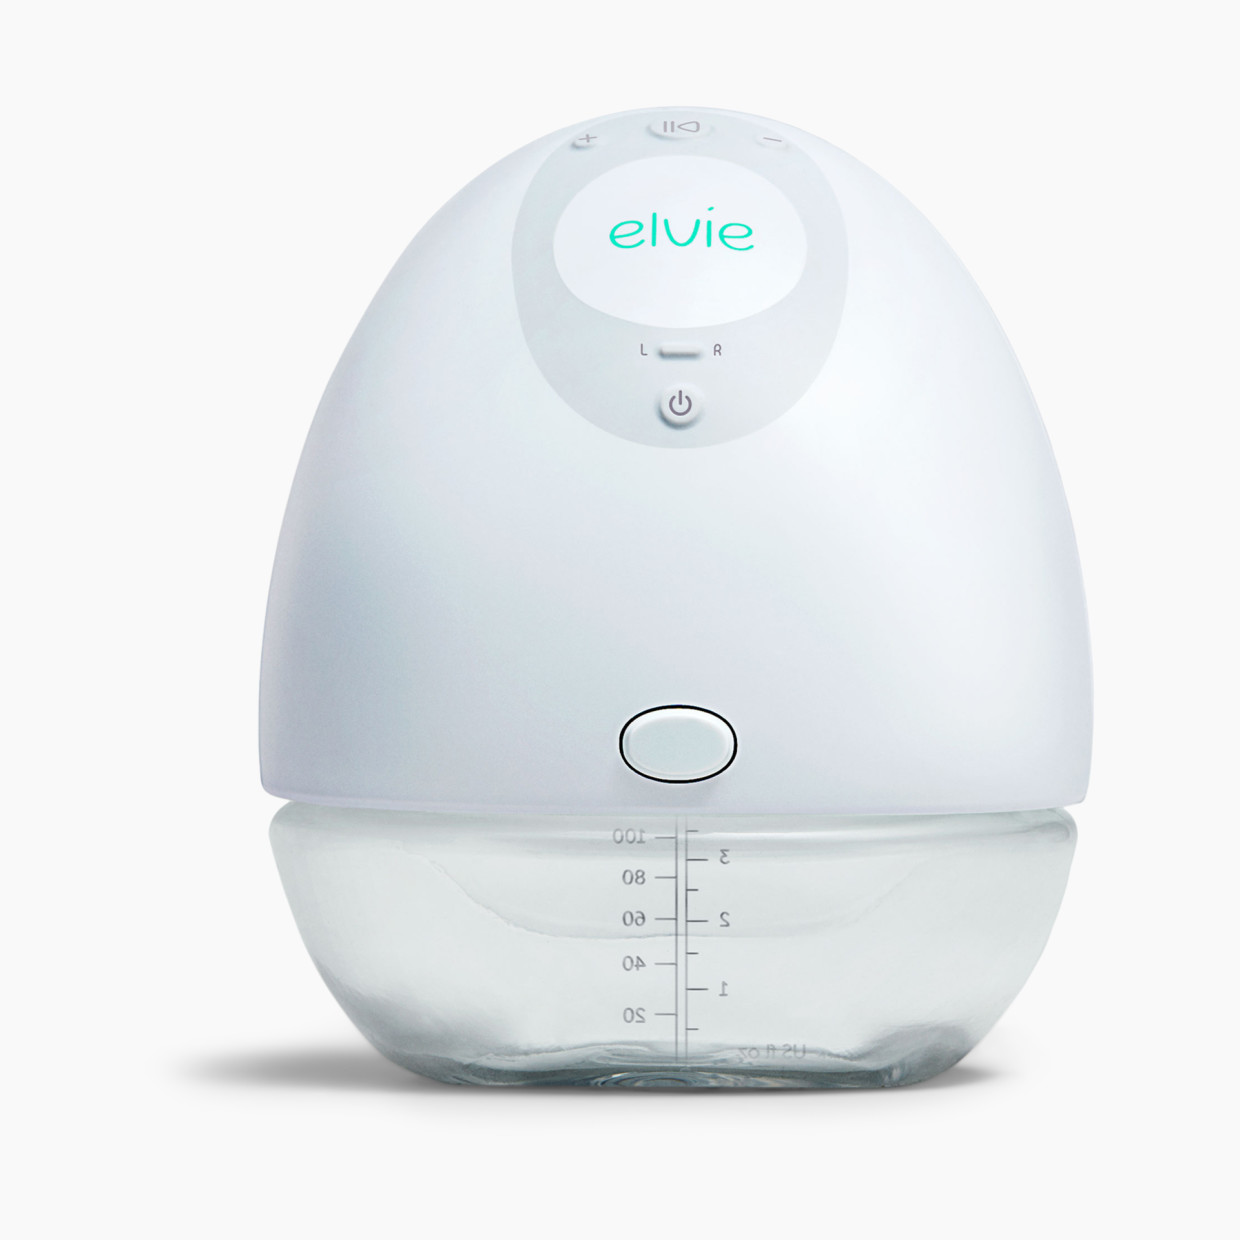 Elvie Pump Review: Hands-Free, Wearable Pump That Reduced My Pumping Time